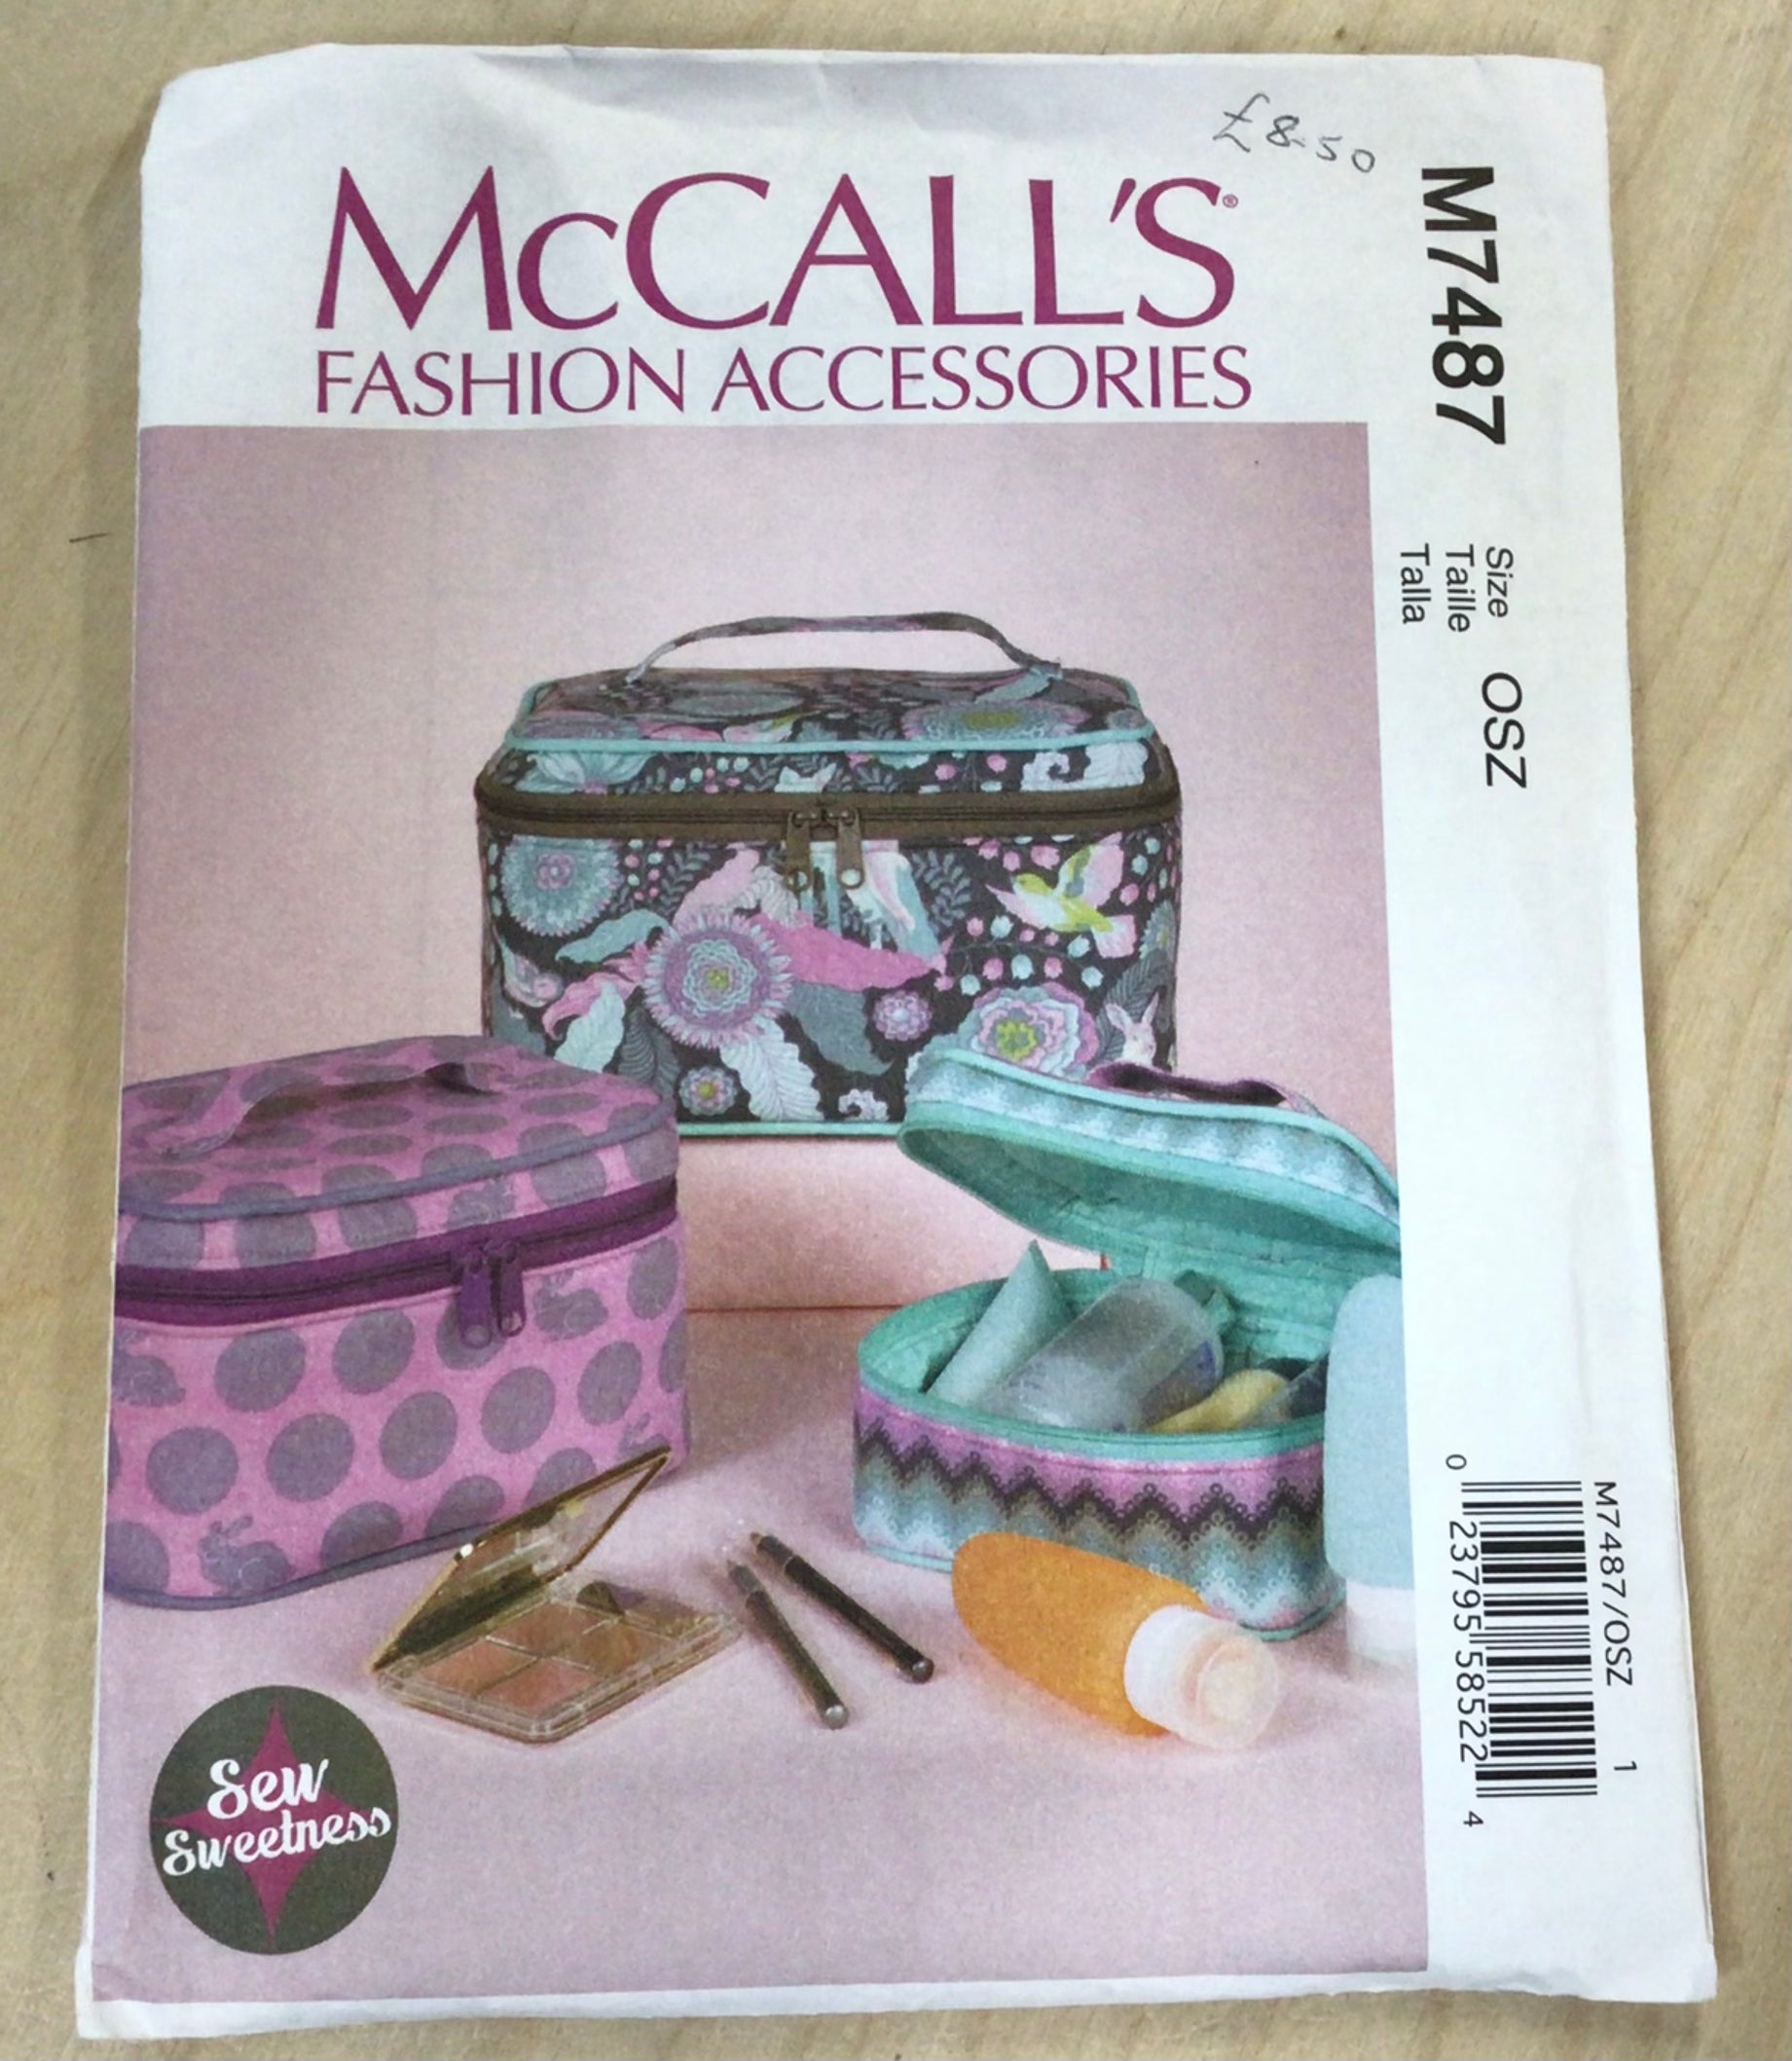 McCall’s M7487 travel cases fashion accessories pattern